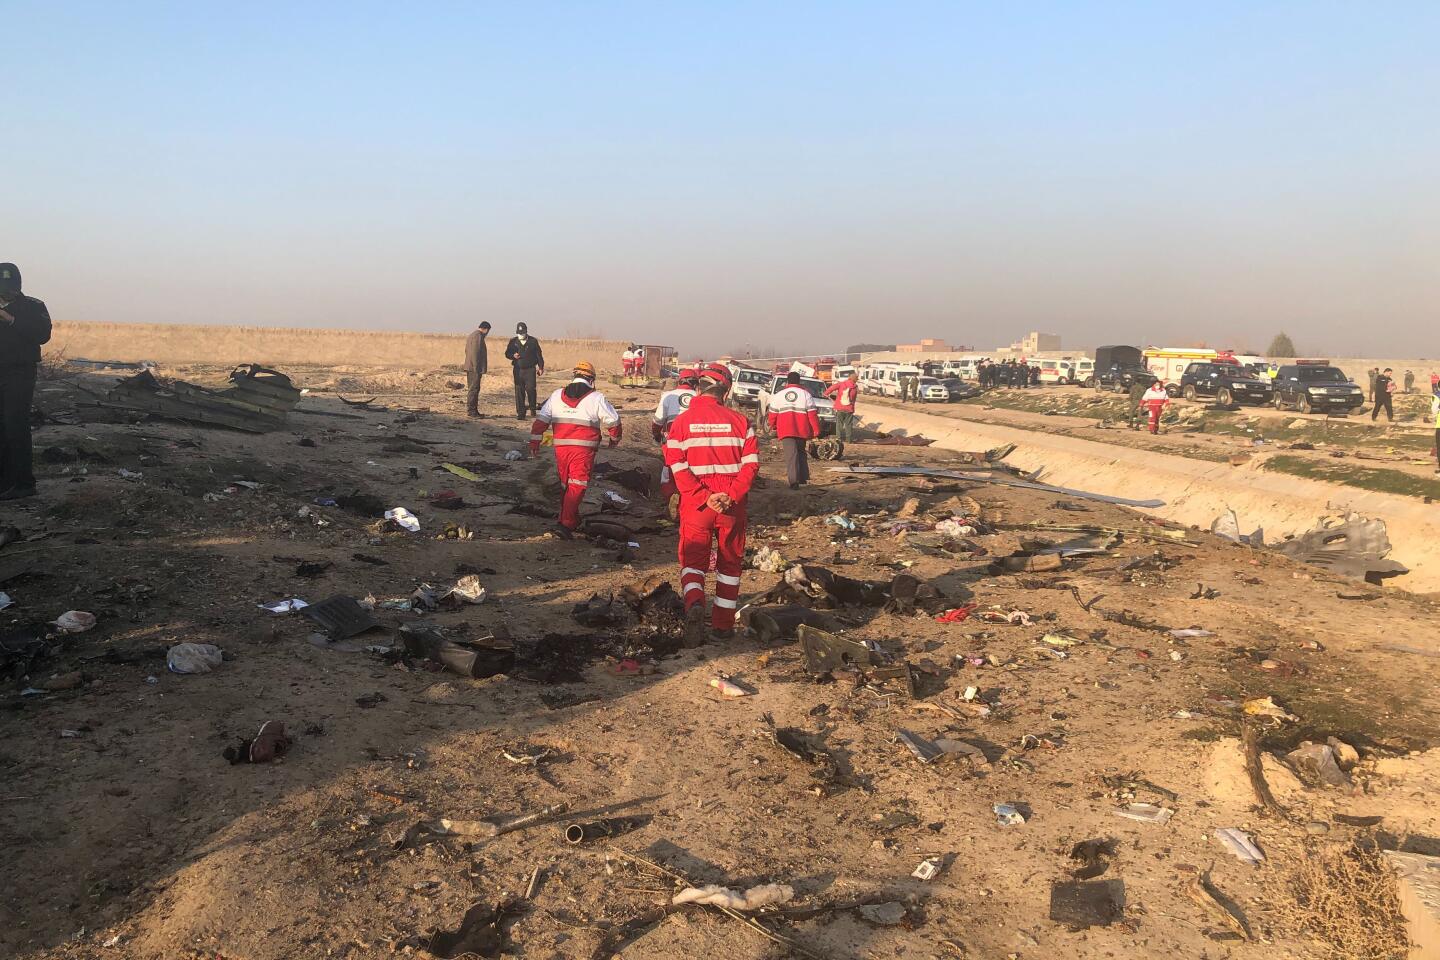 An investigation team was at the site of the crash in the southwestern outskirts of Tehran, officials said. The plane had taken off from Imam Khomeini International Airport in the Iranian capital.